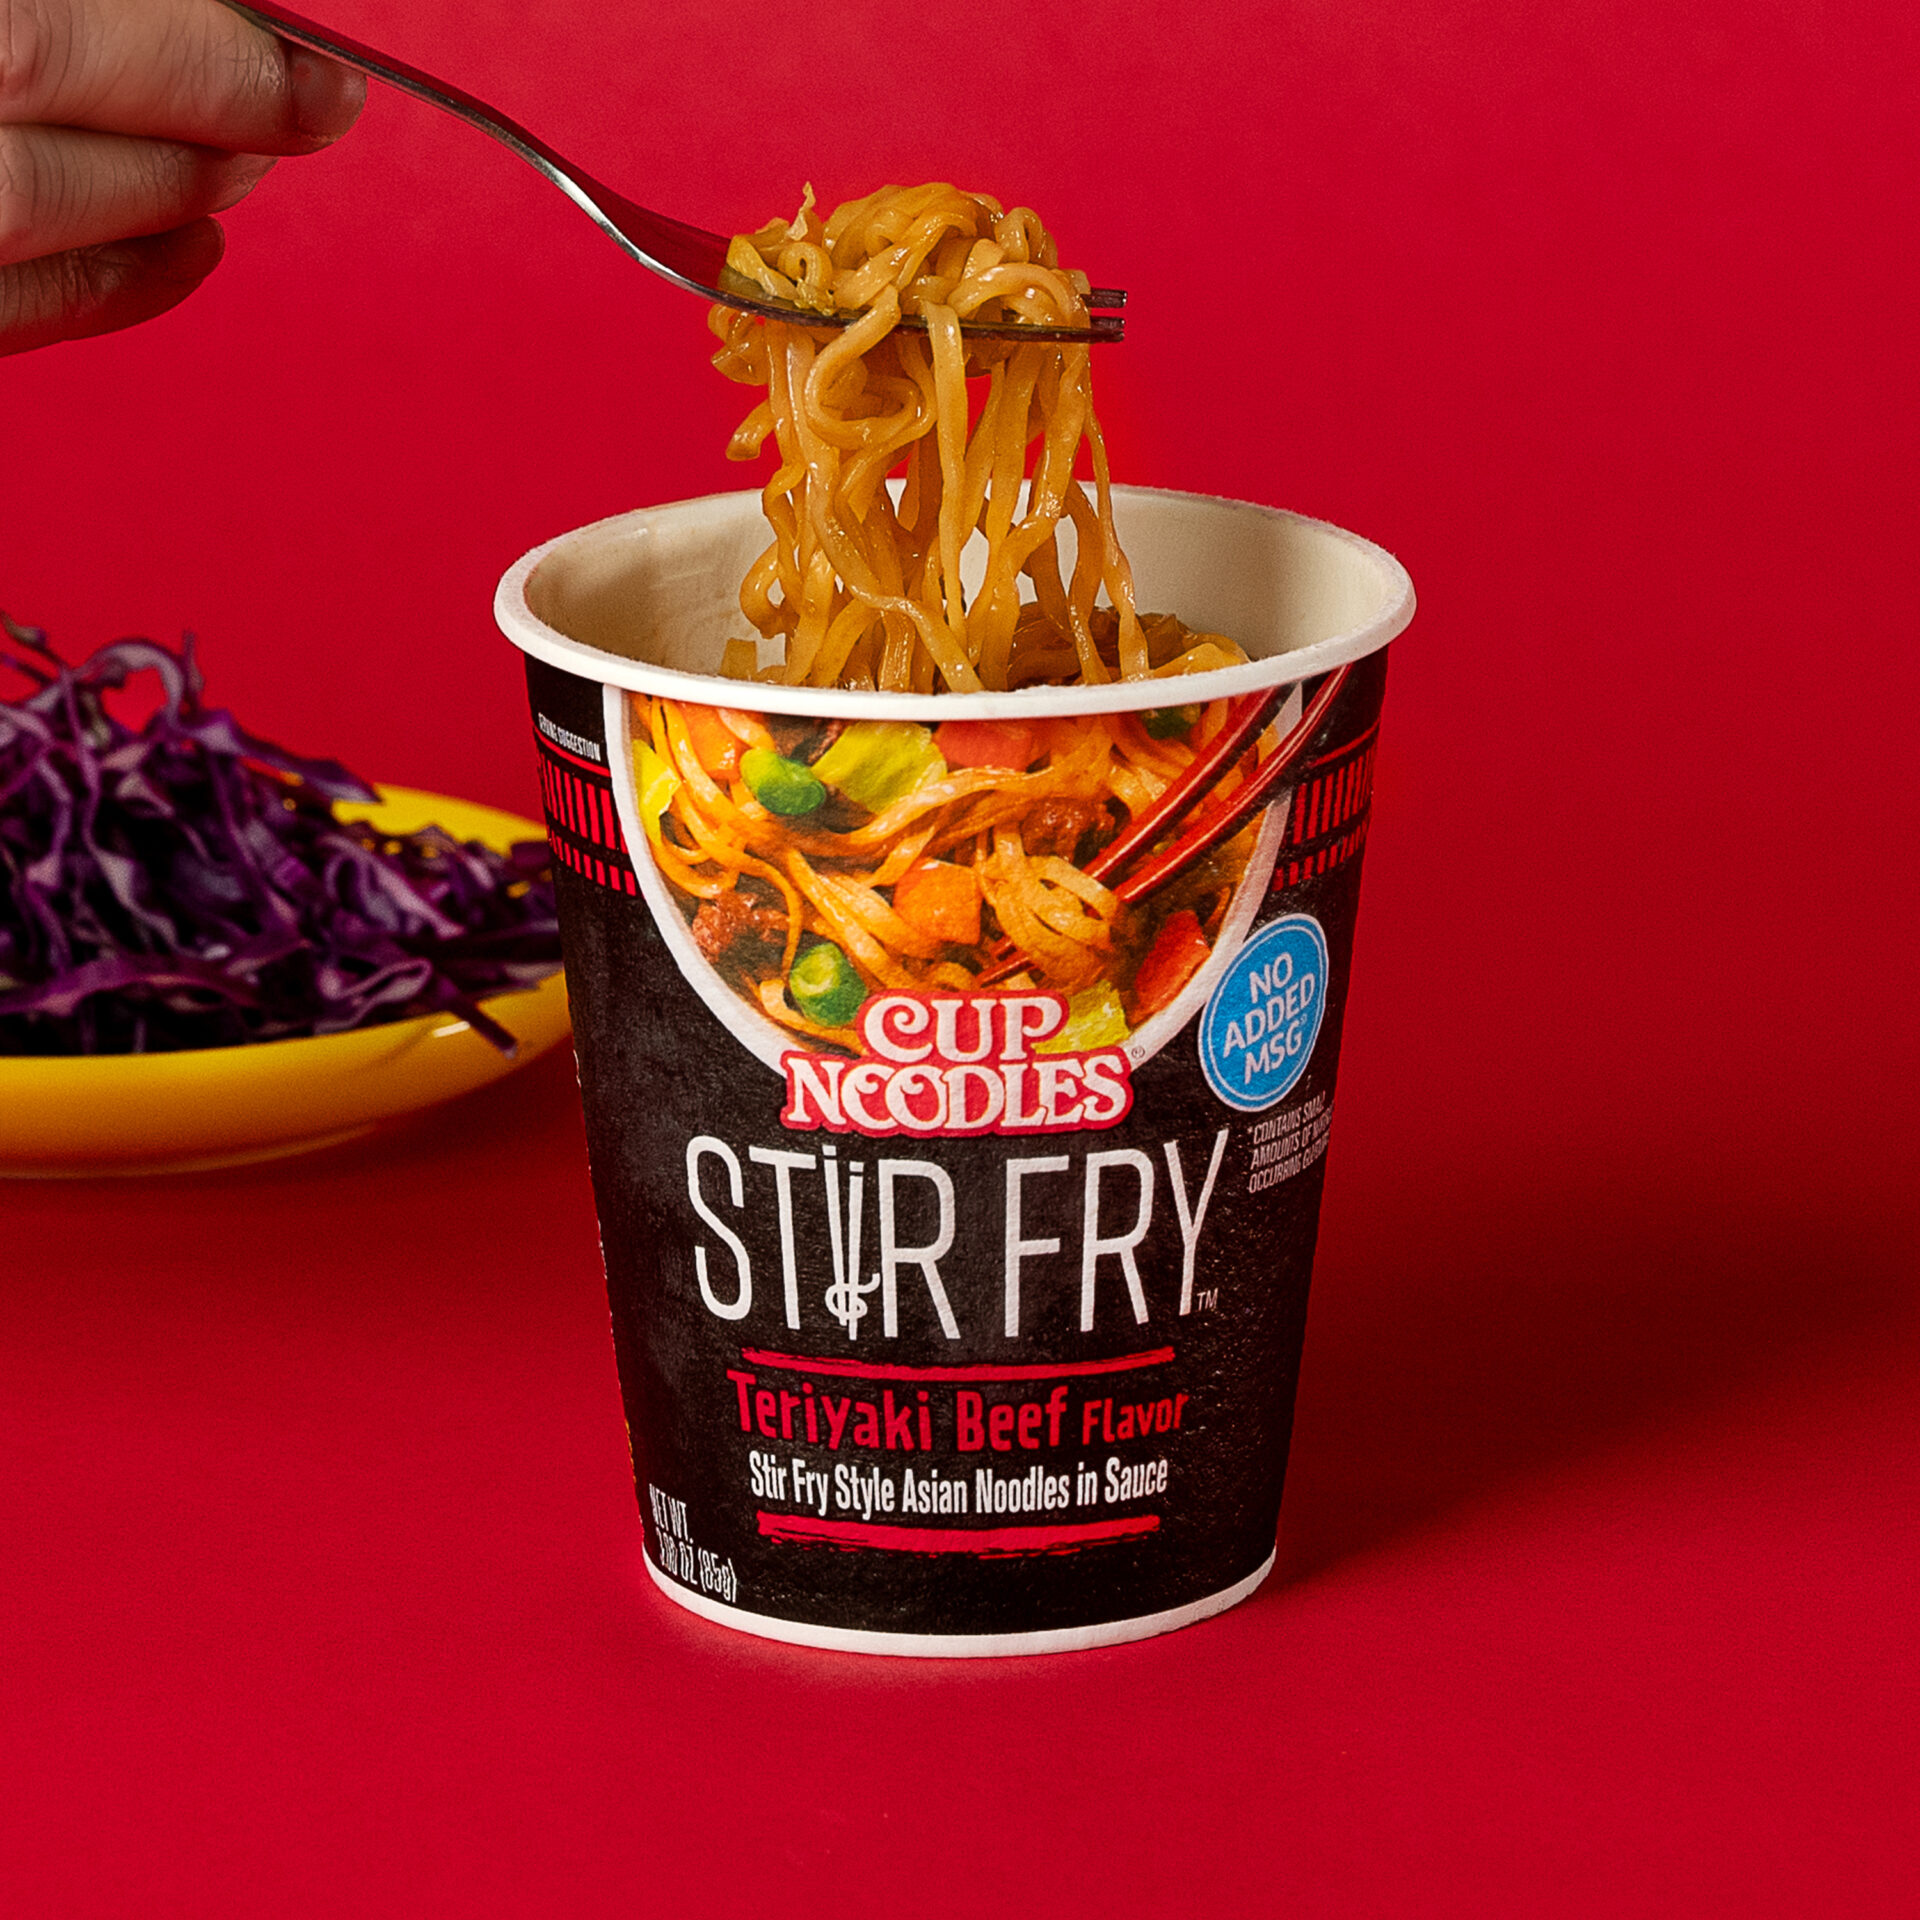 Cup Noodles Stir Fry Rice with Noodles General Tso's Chicken - Nissin Food